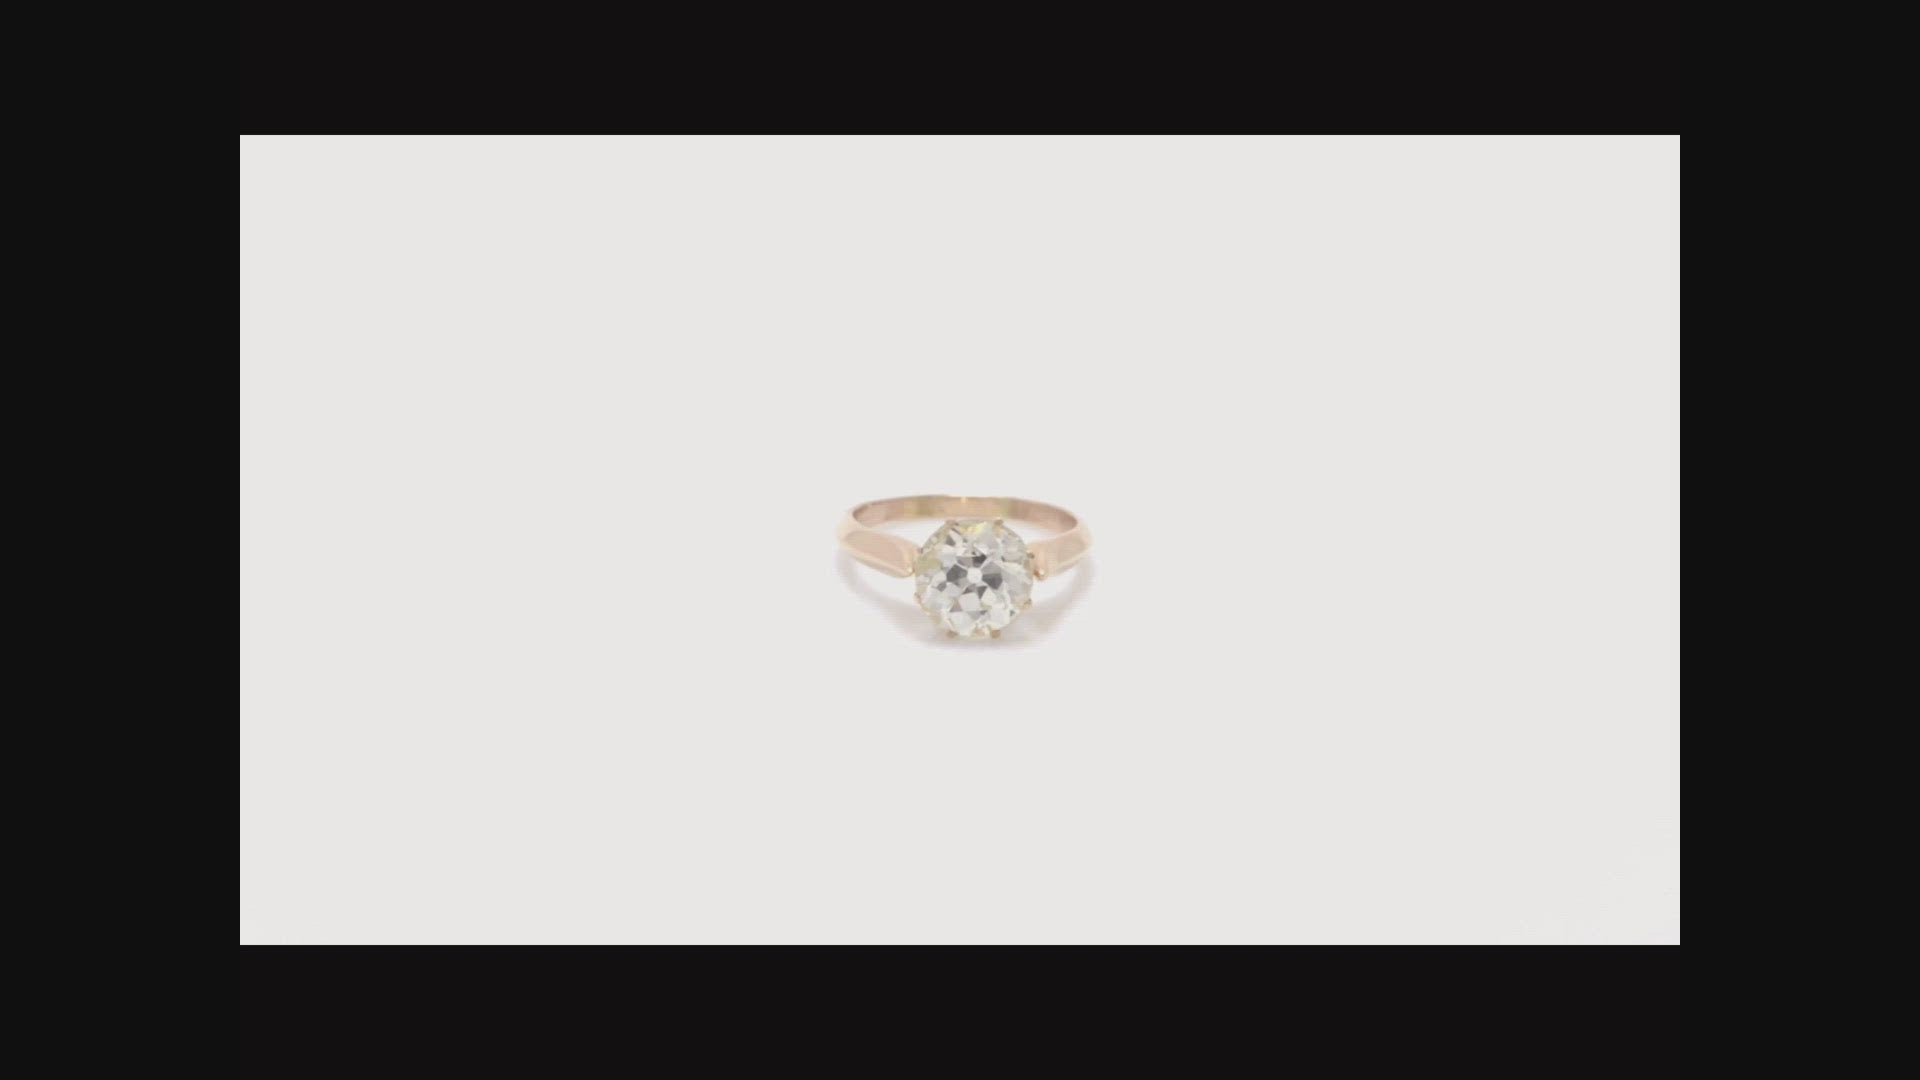 A size 6 antique rose gold diamond solitaire ring from the late 1800s.